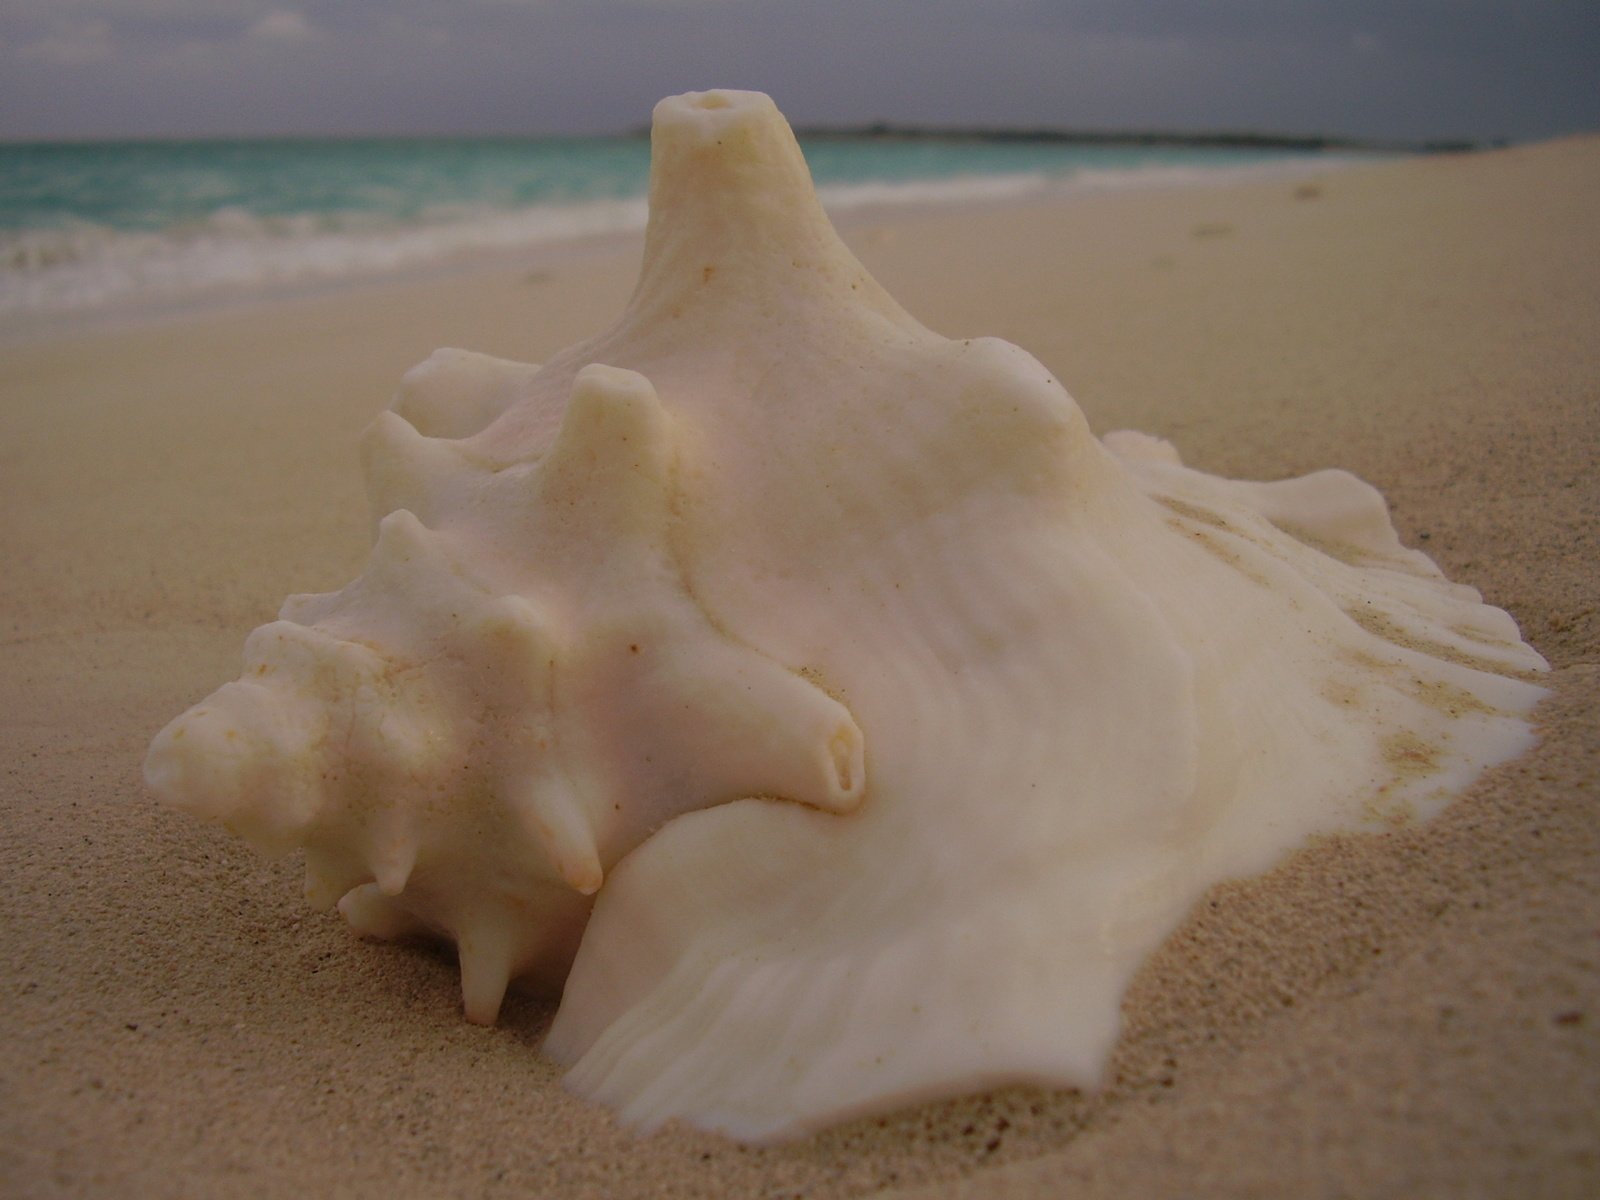 sea shell on sand near water under cloudy sky